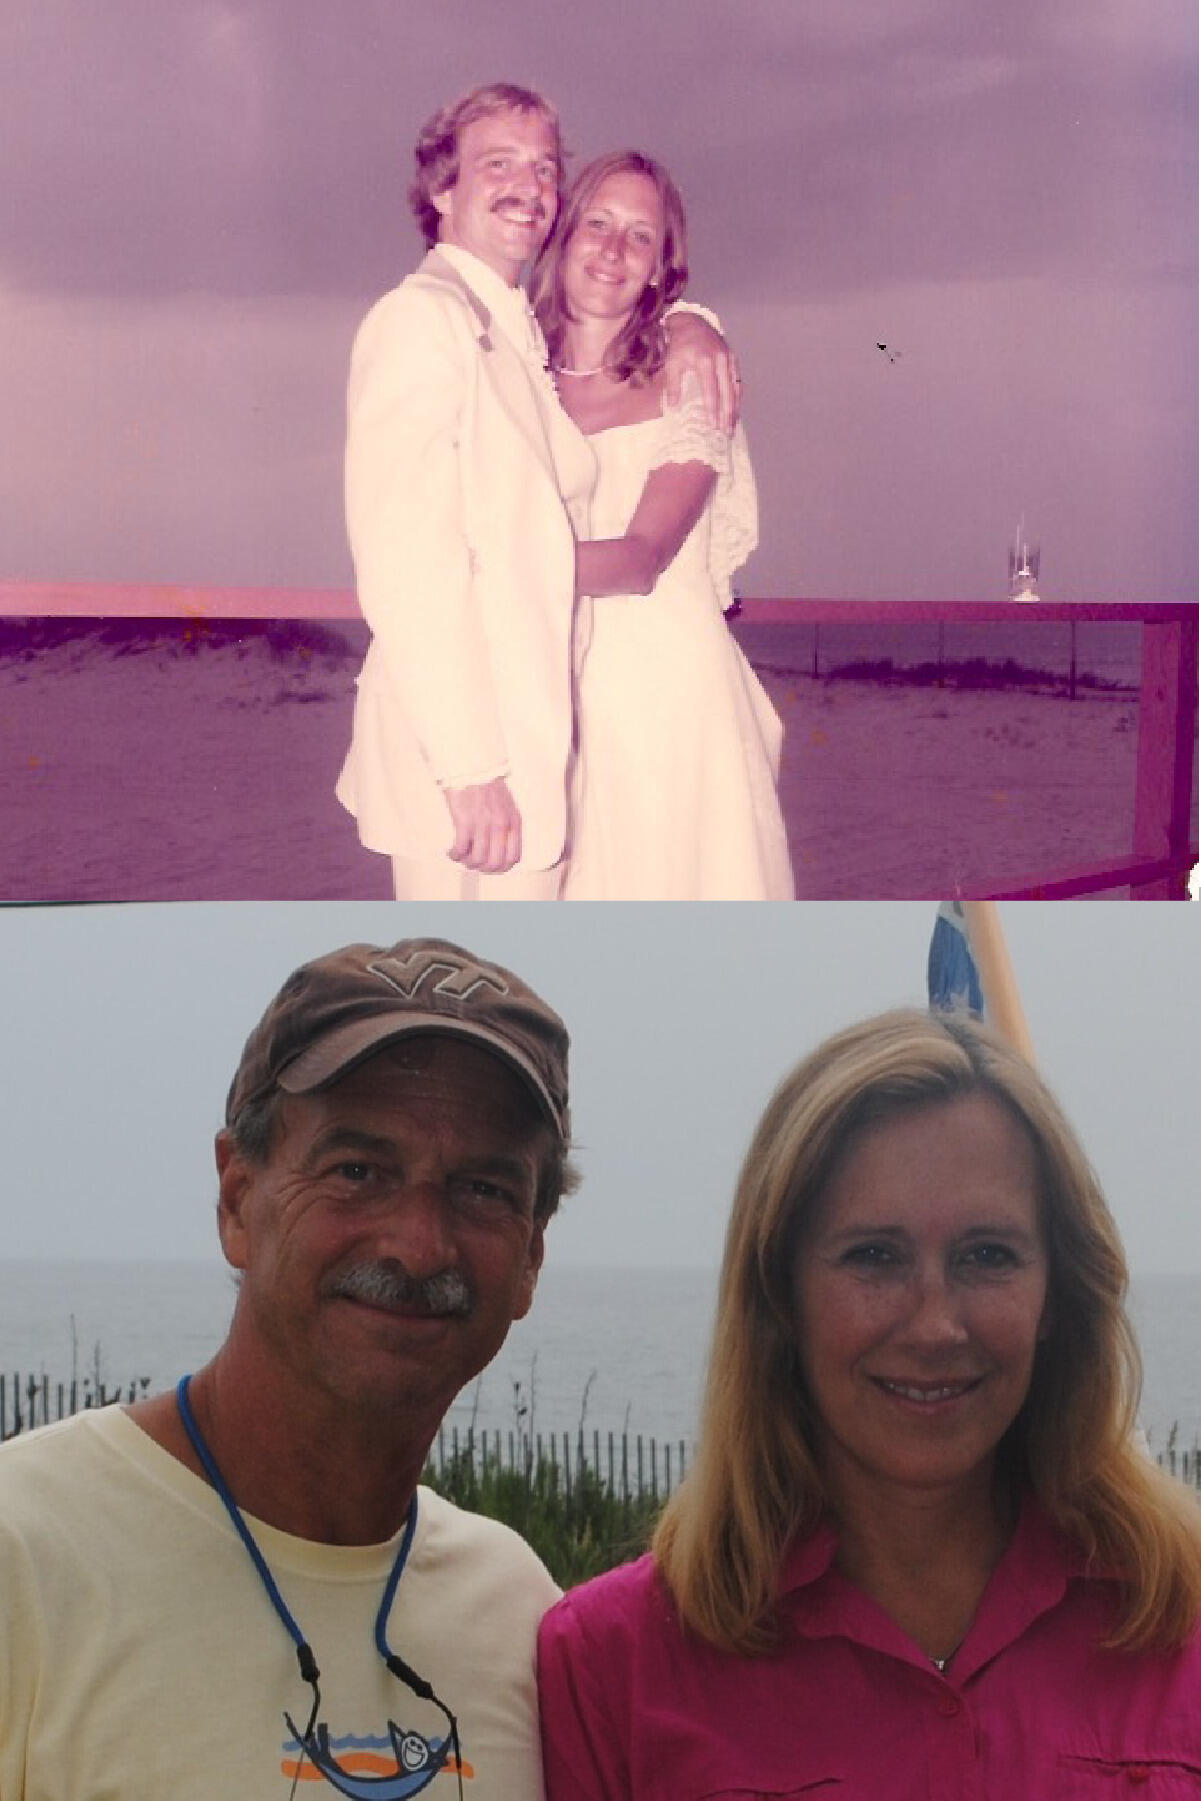 On top is an old photo of a man in a suit and a woman on a wedding dress standing on the beach. On the bottom is a photo of the same couple on a beach but older. 